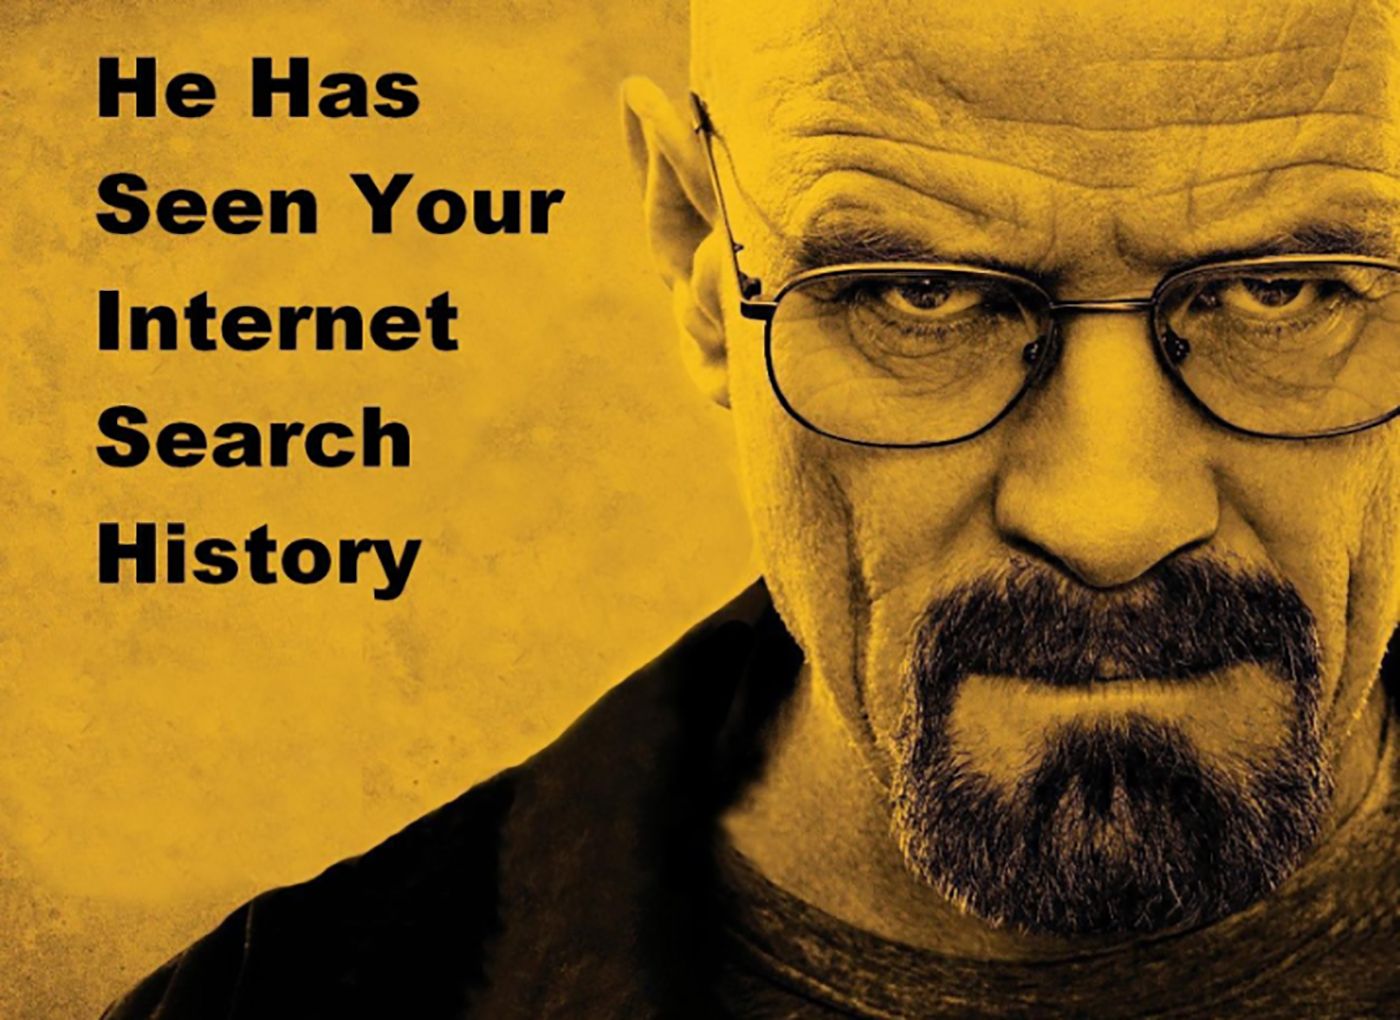 An image of Walter White looking mean in a meme for Breaking Bad.